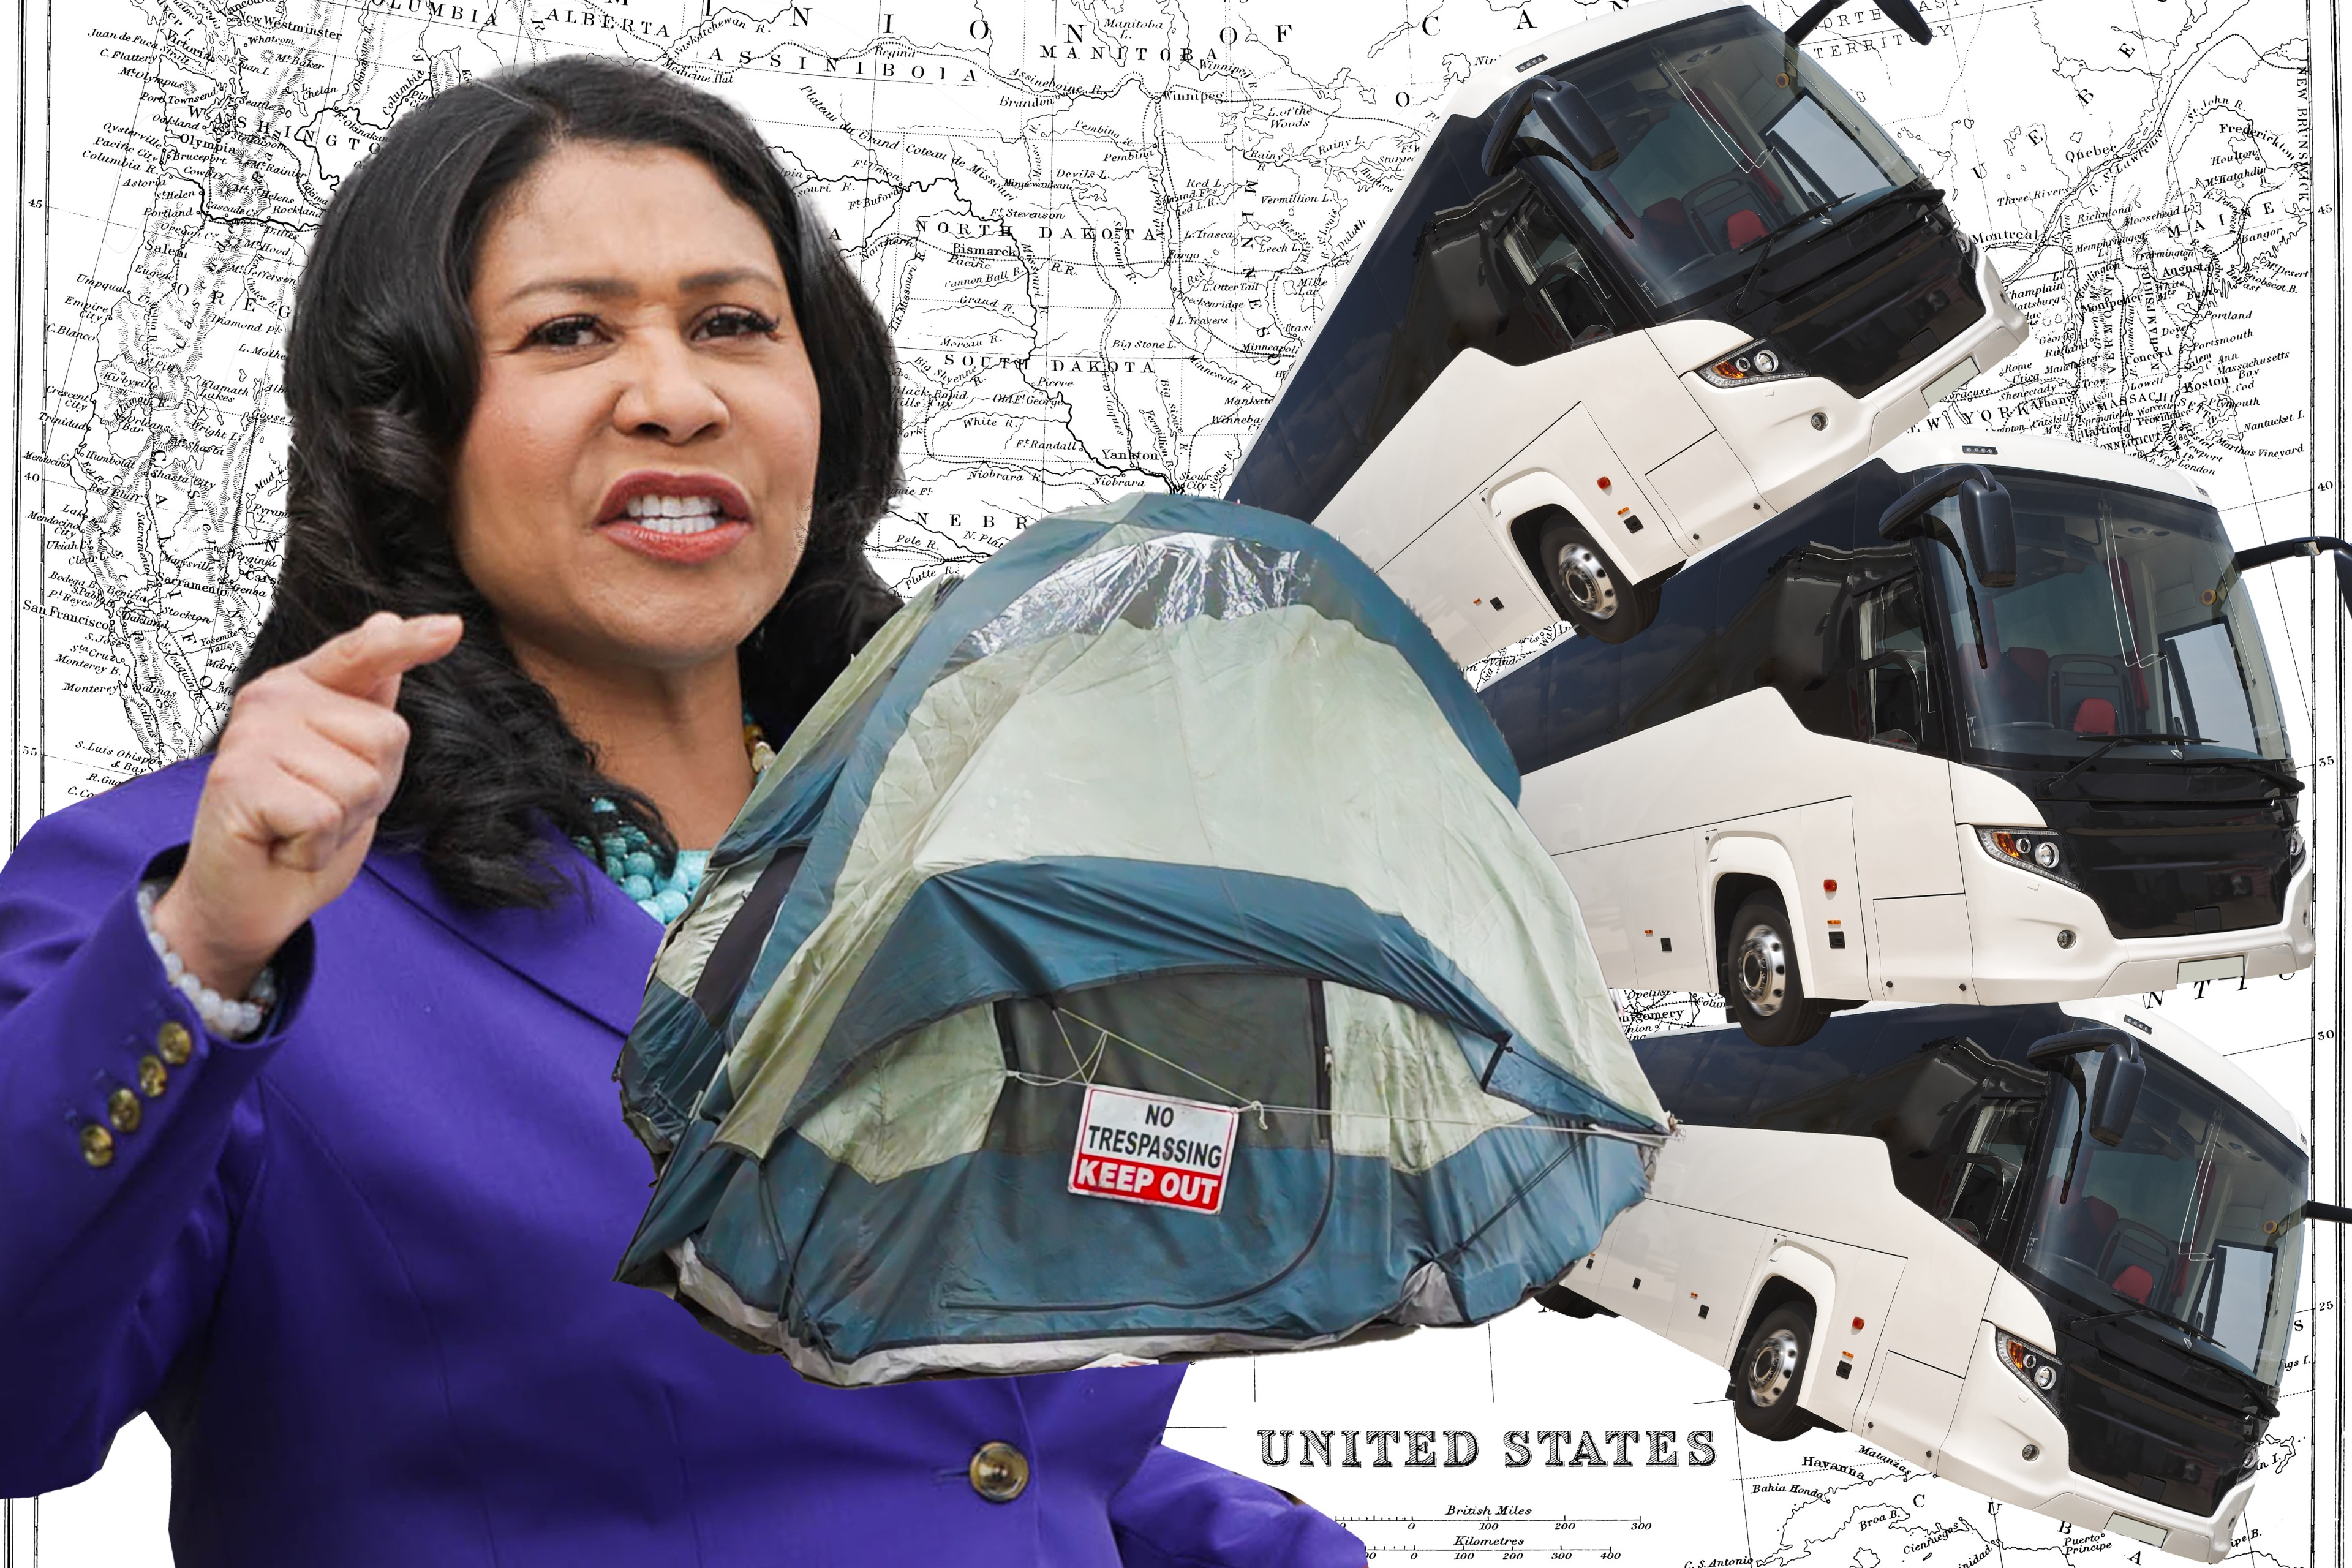 A woman in a purple jacket speaks passionately. Behind her, a tent with a "No Trespassing" sign and three white buses overlap a U.S. map background.